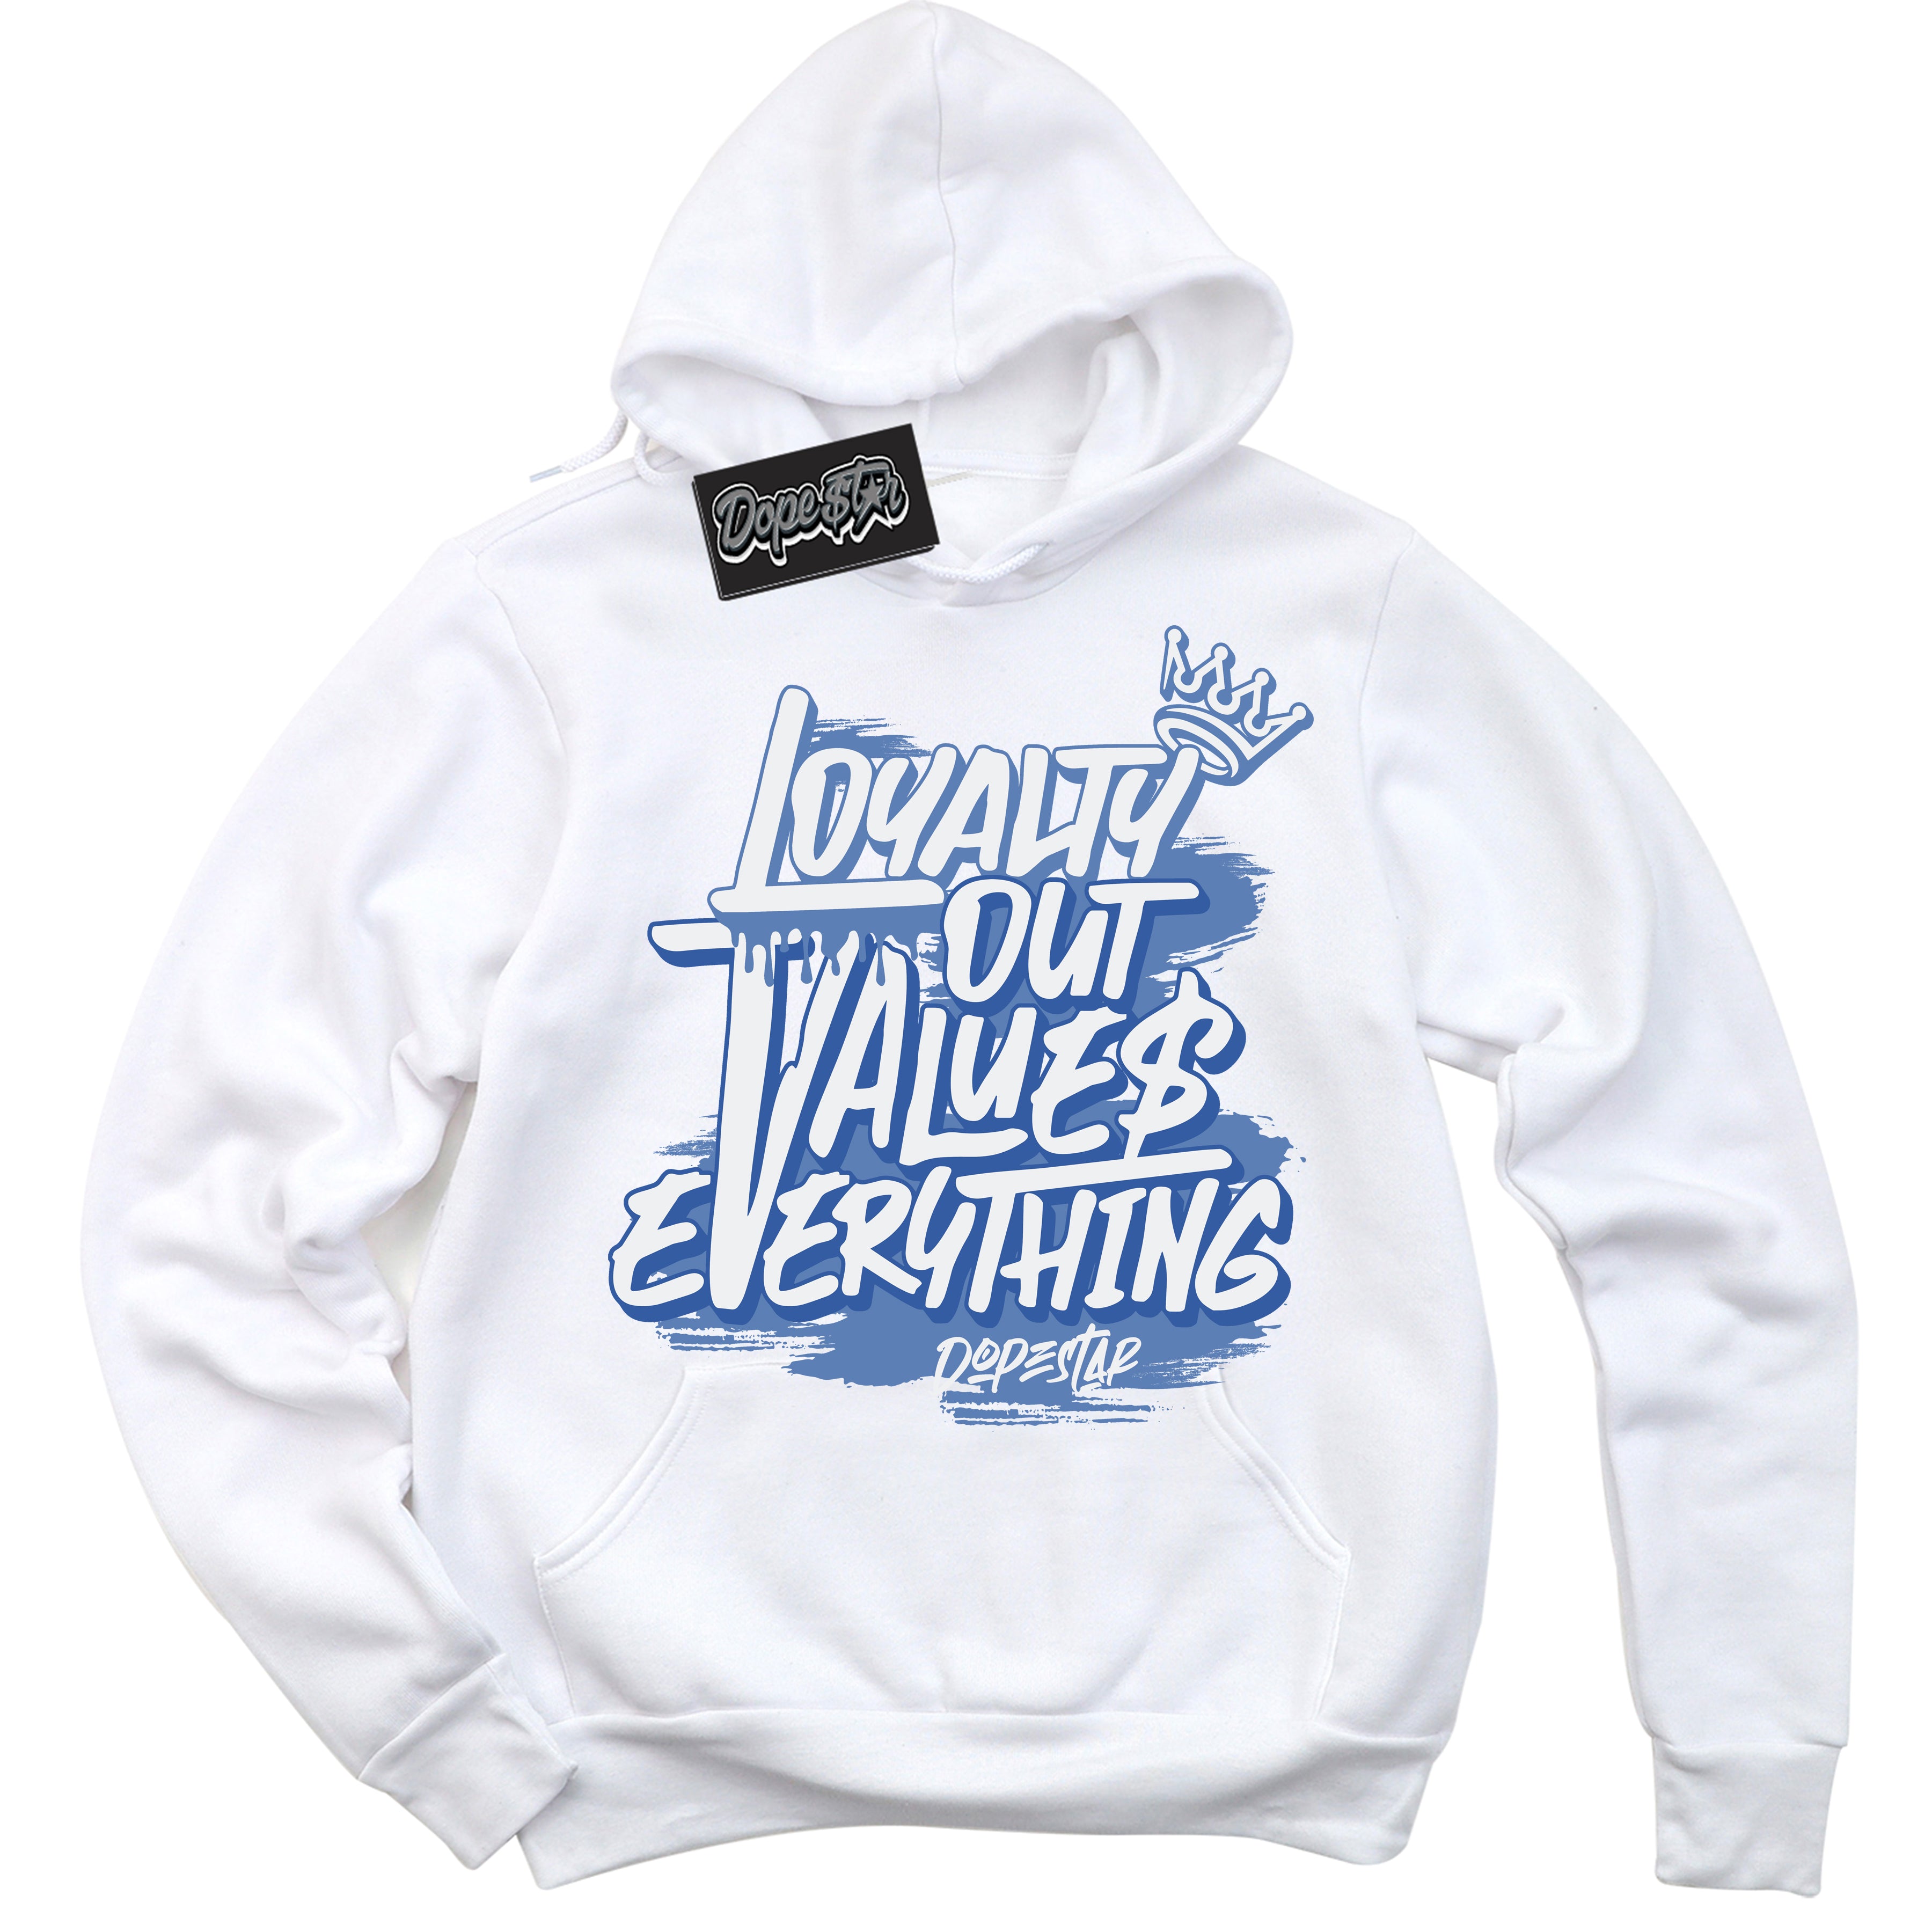 Cool White Hoodie with “ Loyalty Out Values Everything ”  design that Perfectly Matches Twist University Blue Sneakers.